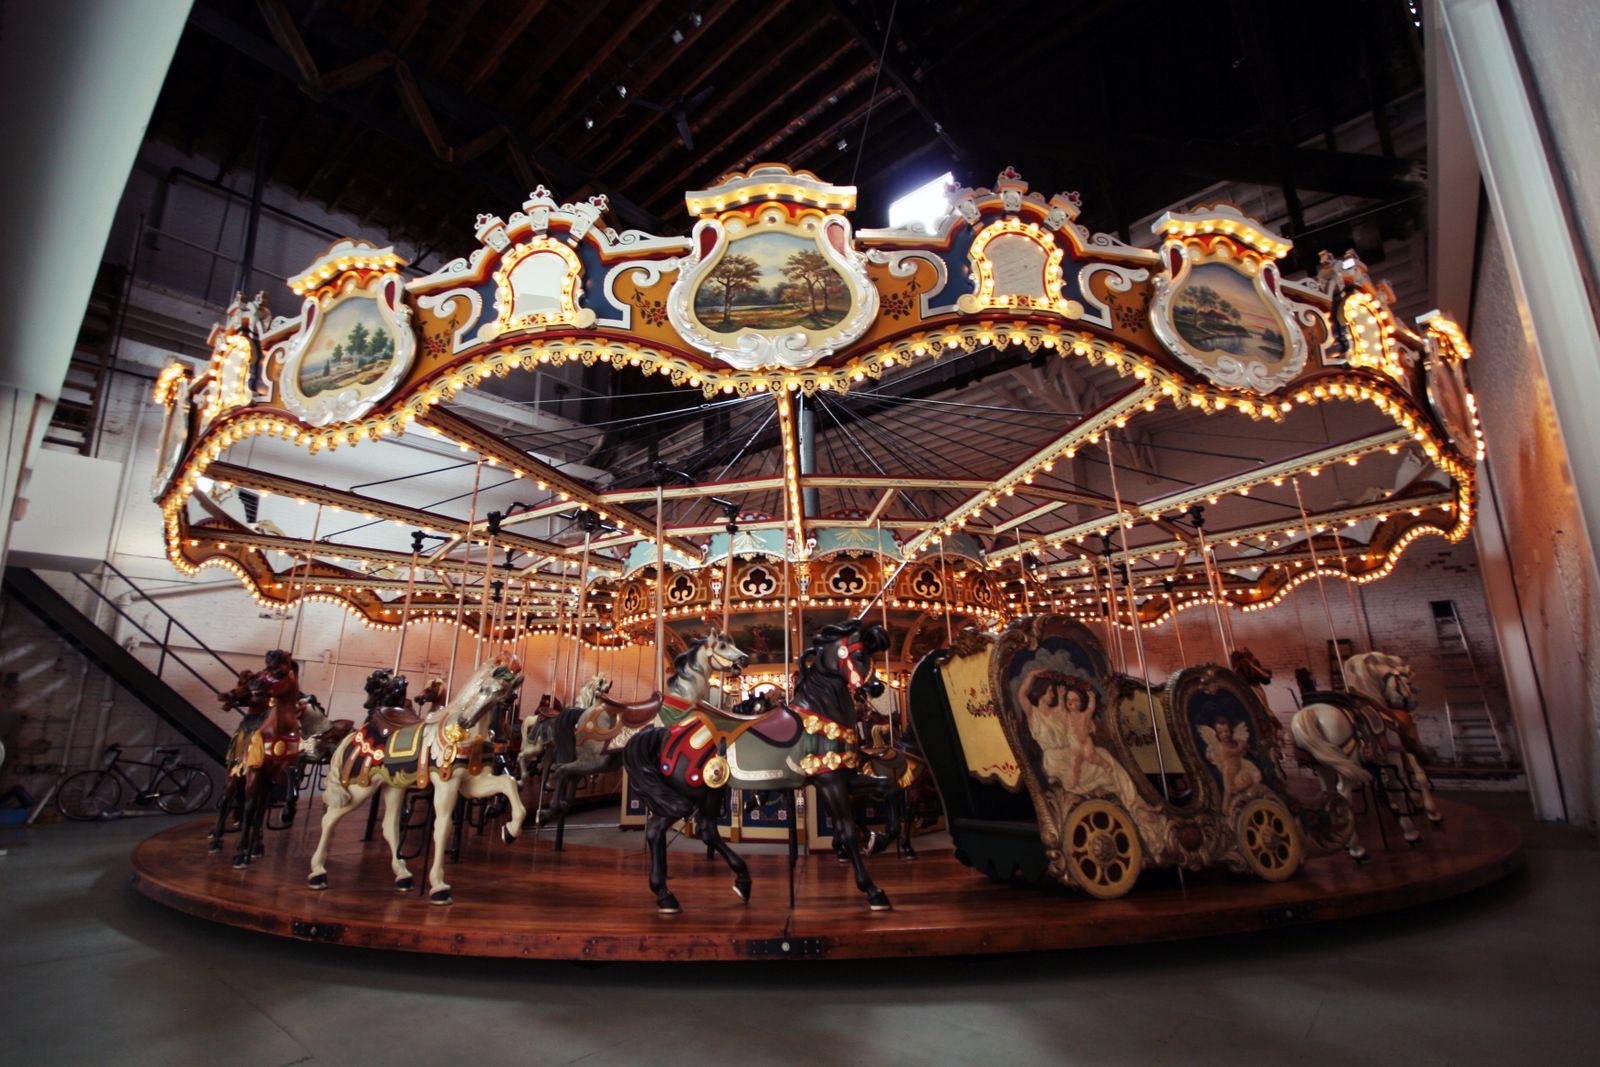 alt="Preserving The Carousels"